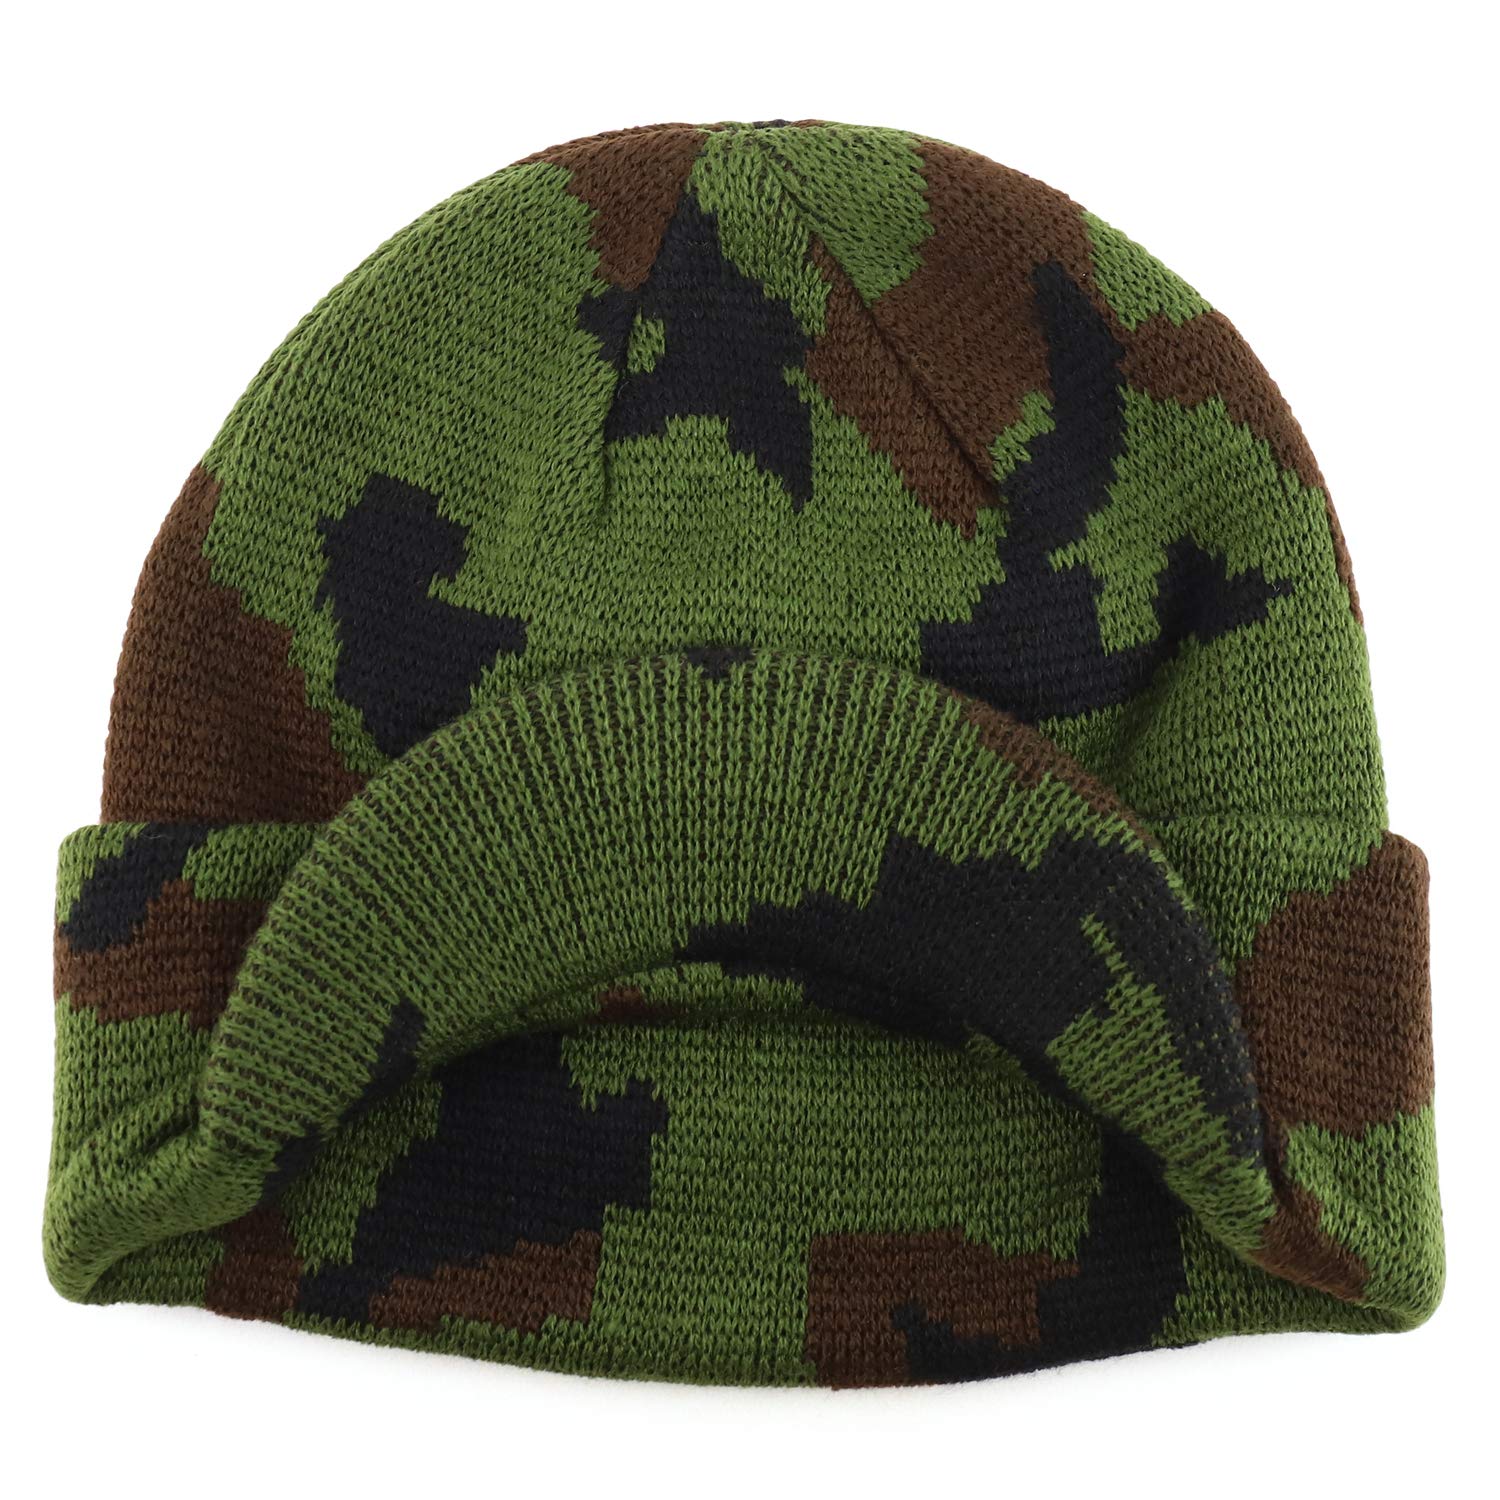 Armycrew Camouflage Knit Beanie Hat with Visor - WDL